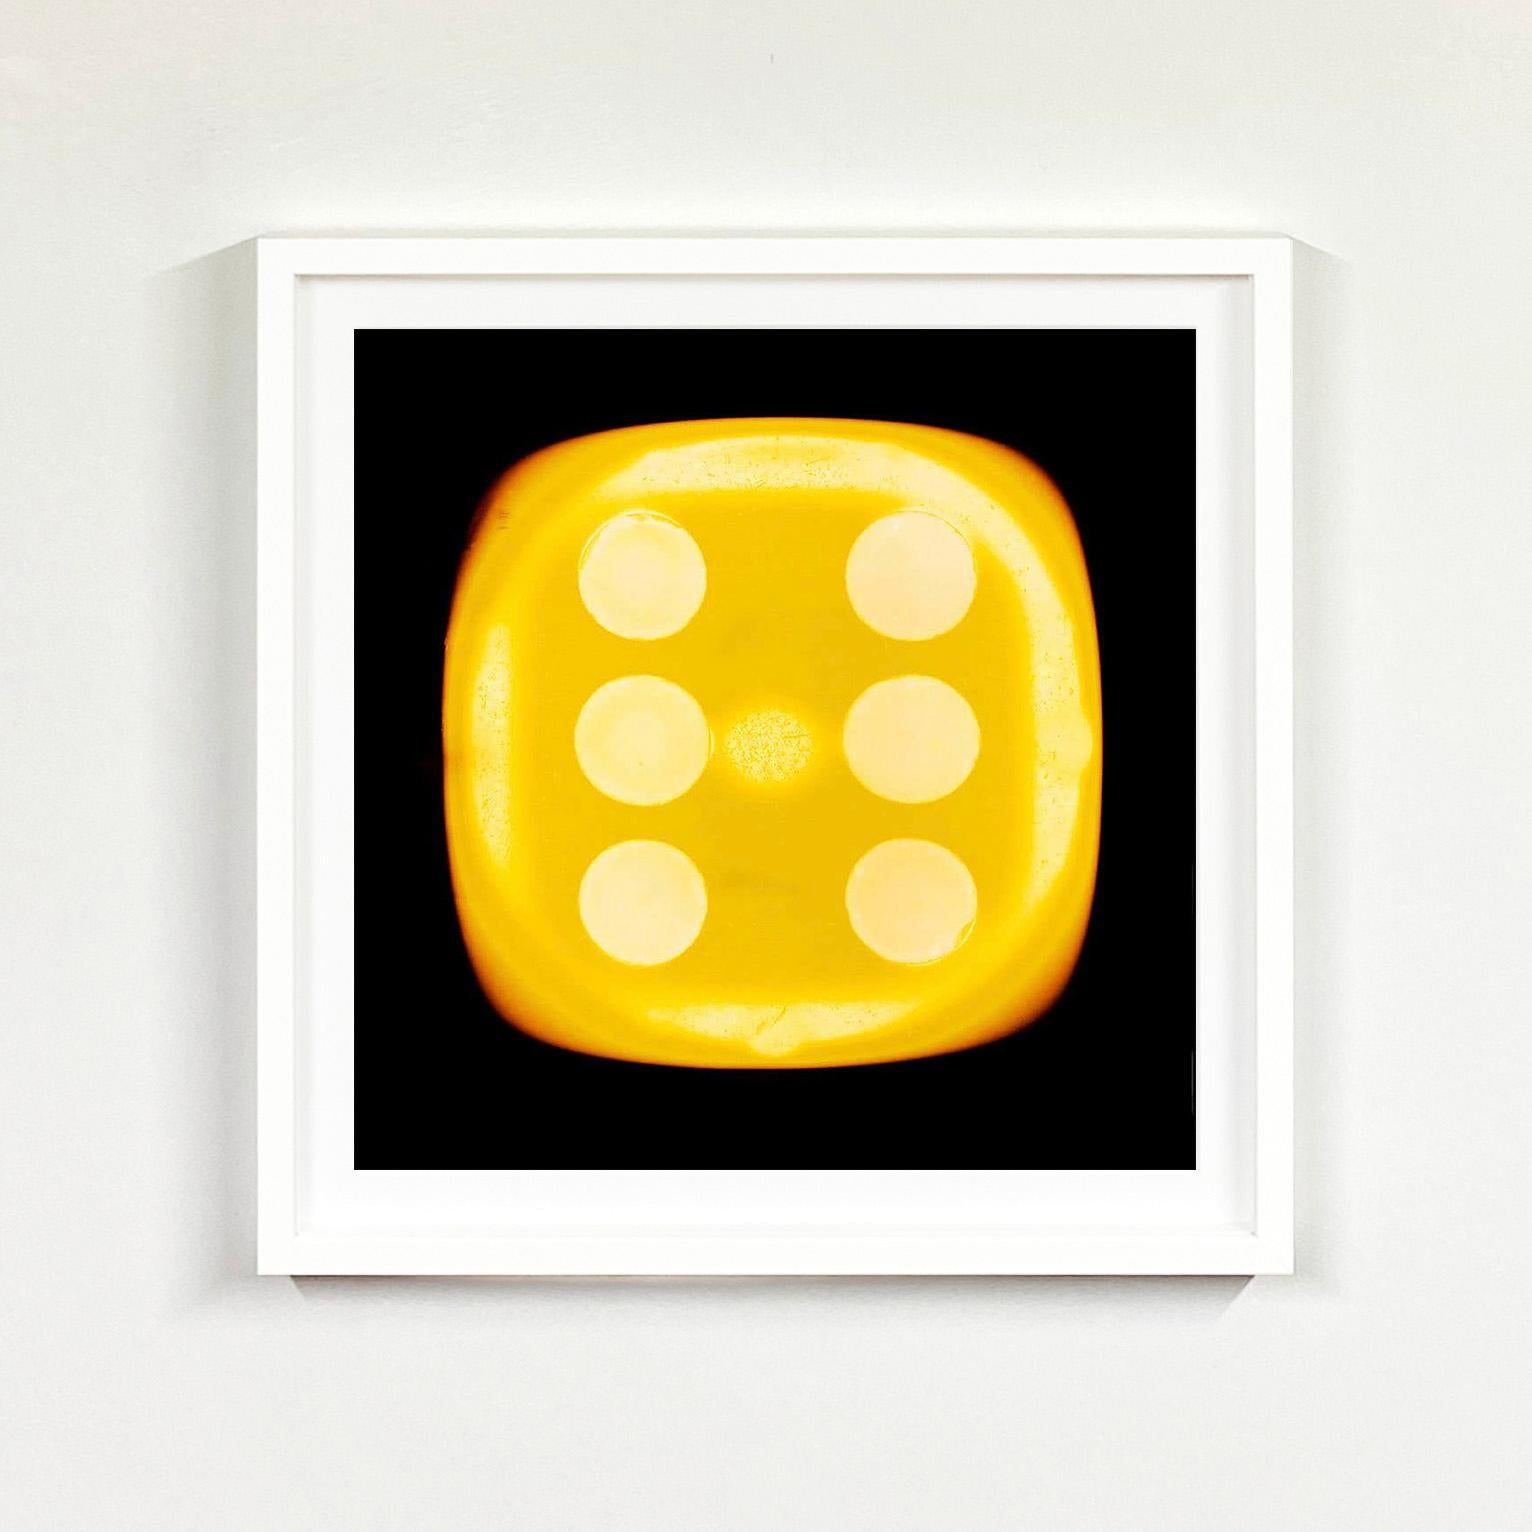 Dice Series, Chartreuse Yellow Six (black) - Pop Art Color Photography - Print by Heidler & Heeps